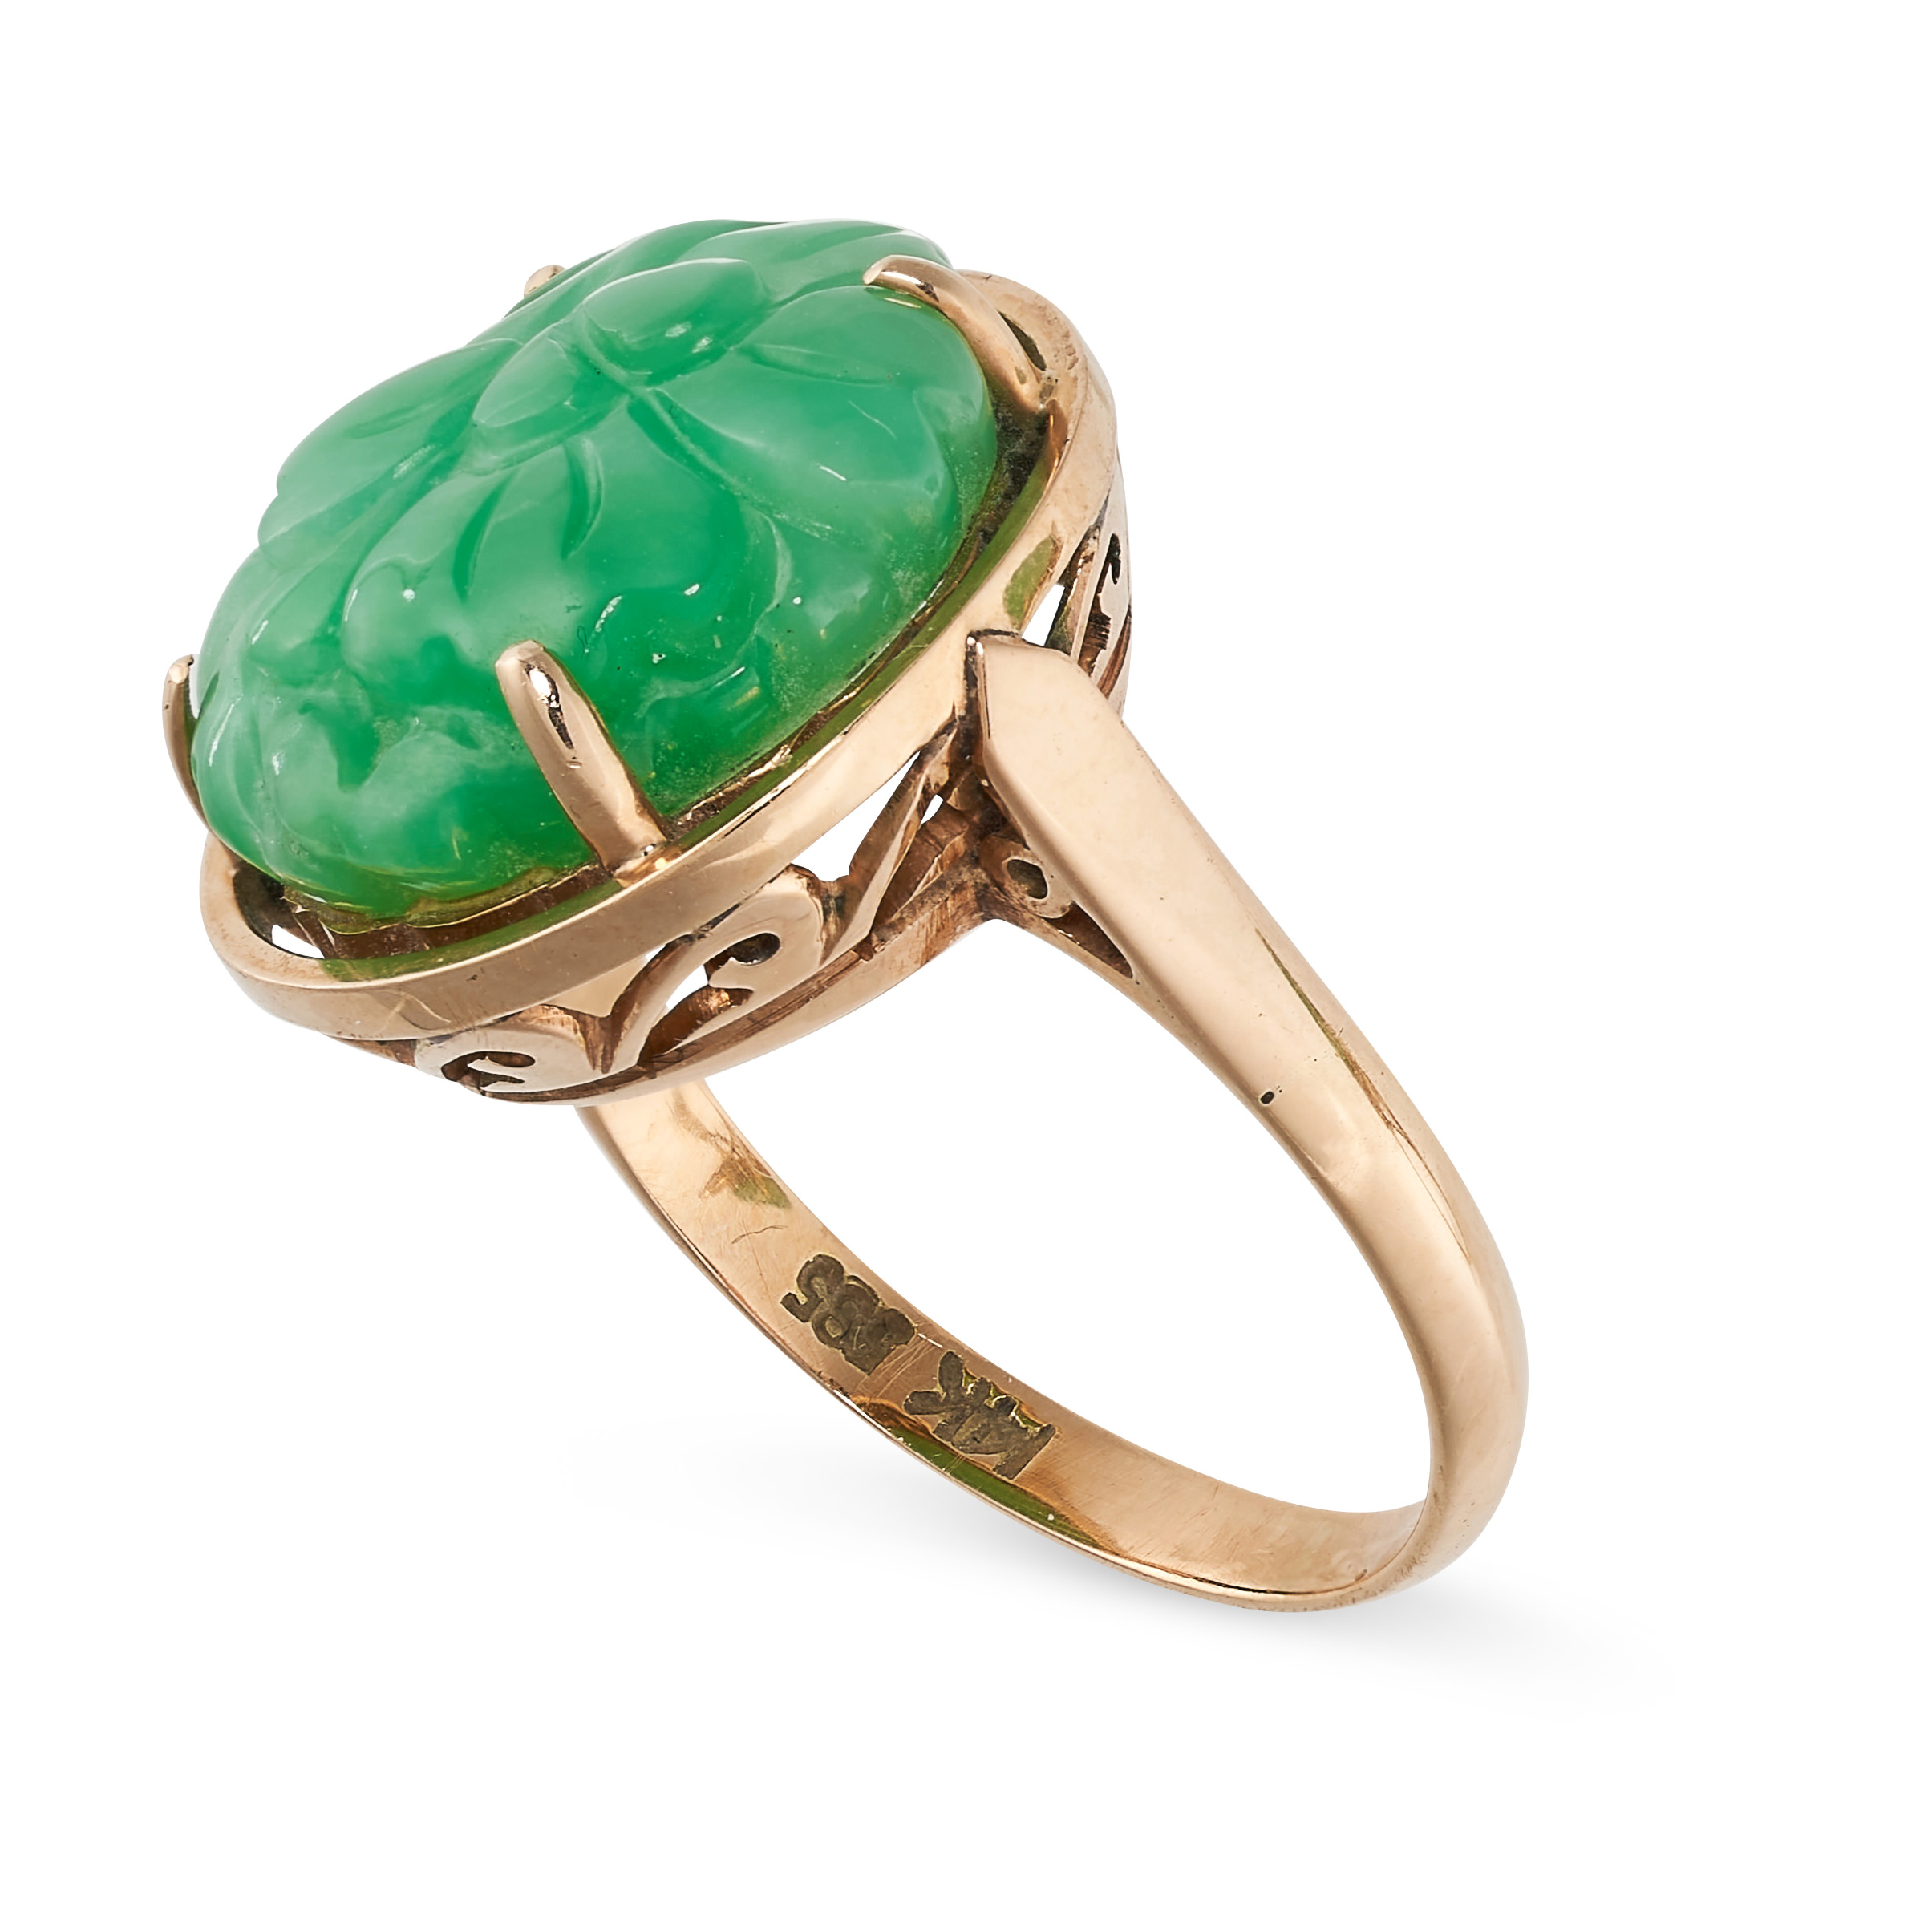 A JADEITE JADE DRESS RING in 14ct yellow gold, set with a circular piece of jadeite carved in the - Image 2 of 2